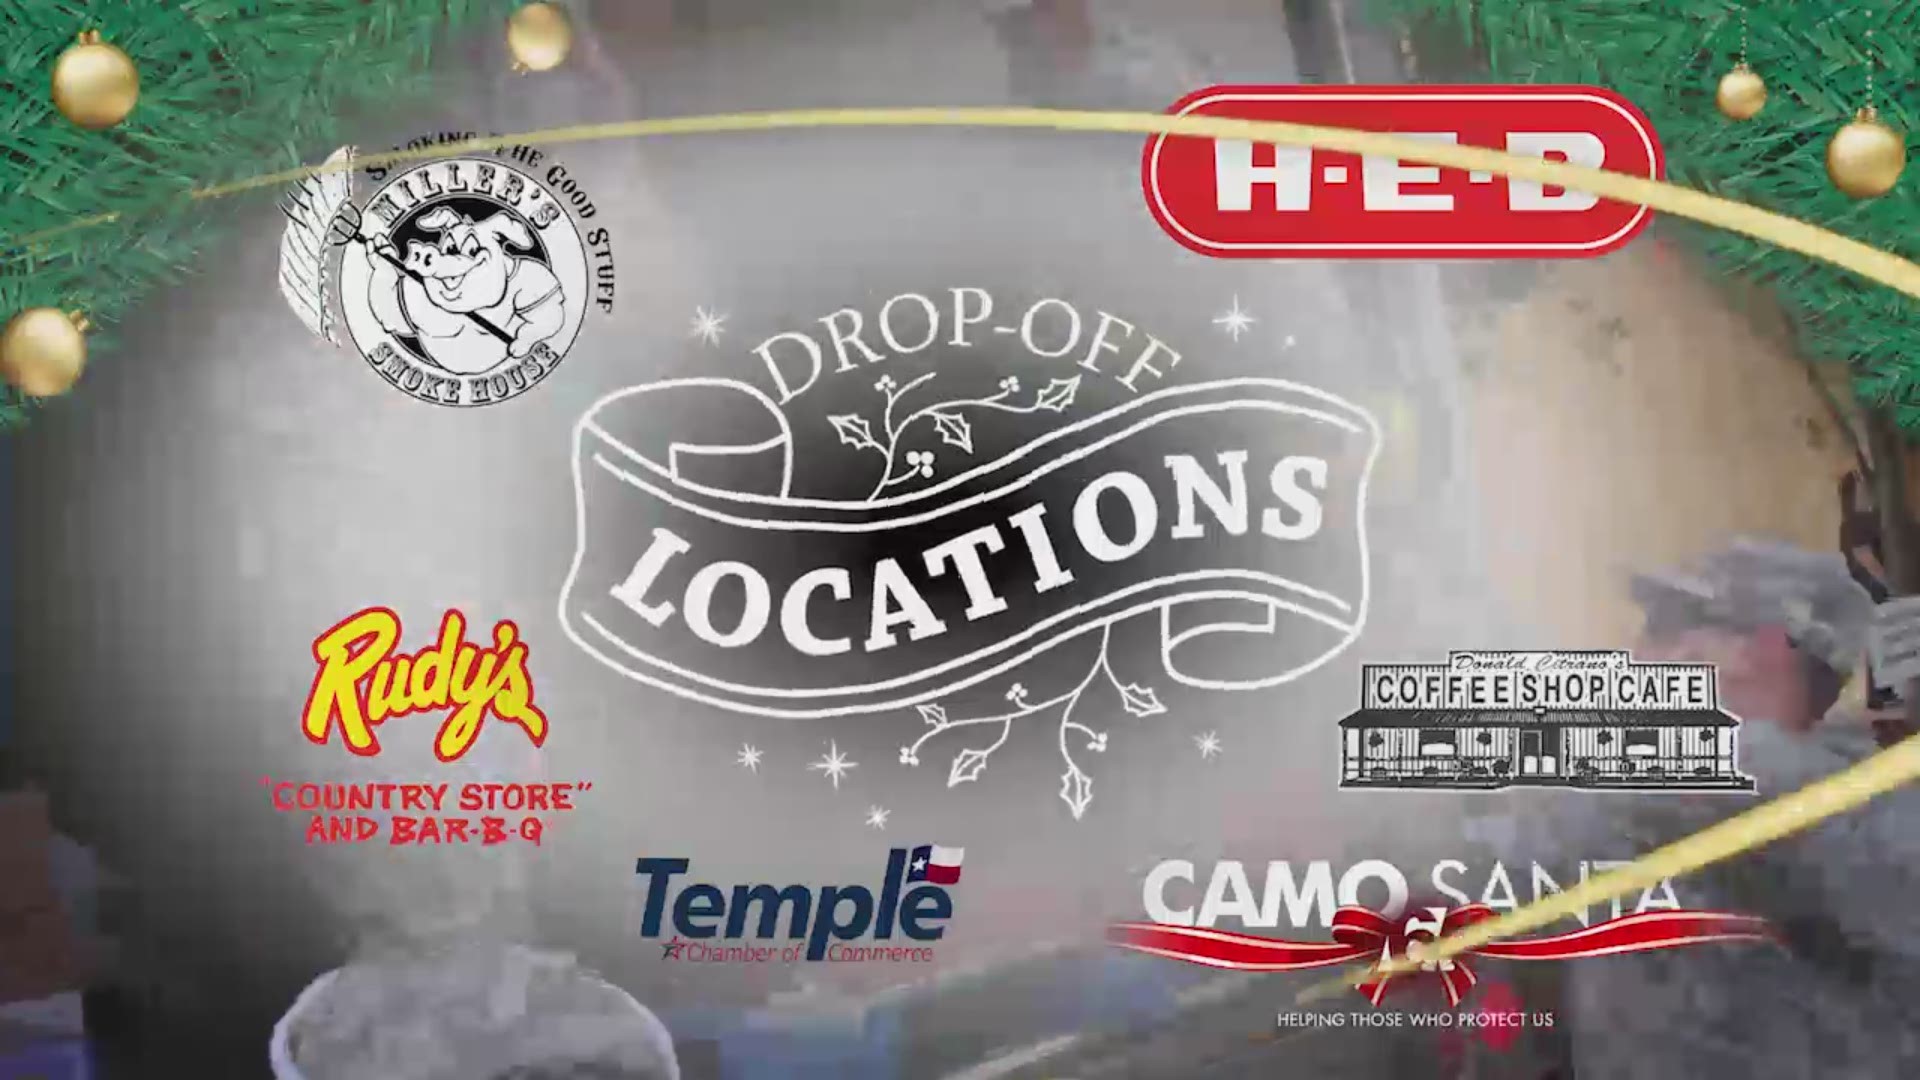 Donate your new, unwrapped toys for military children at any Central Texas H-E-B location during early December.